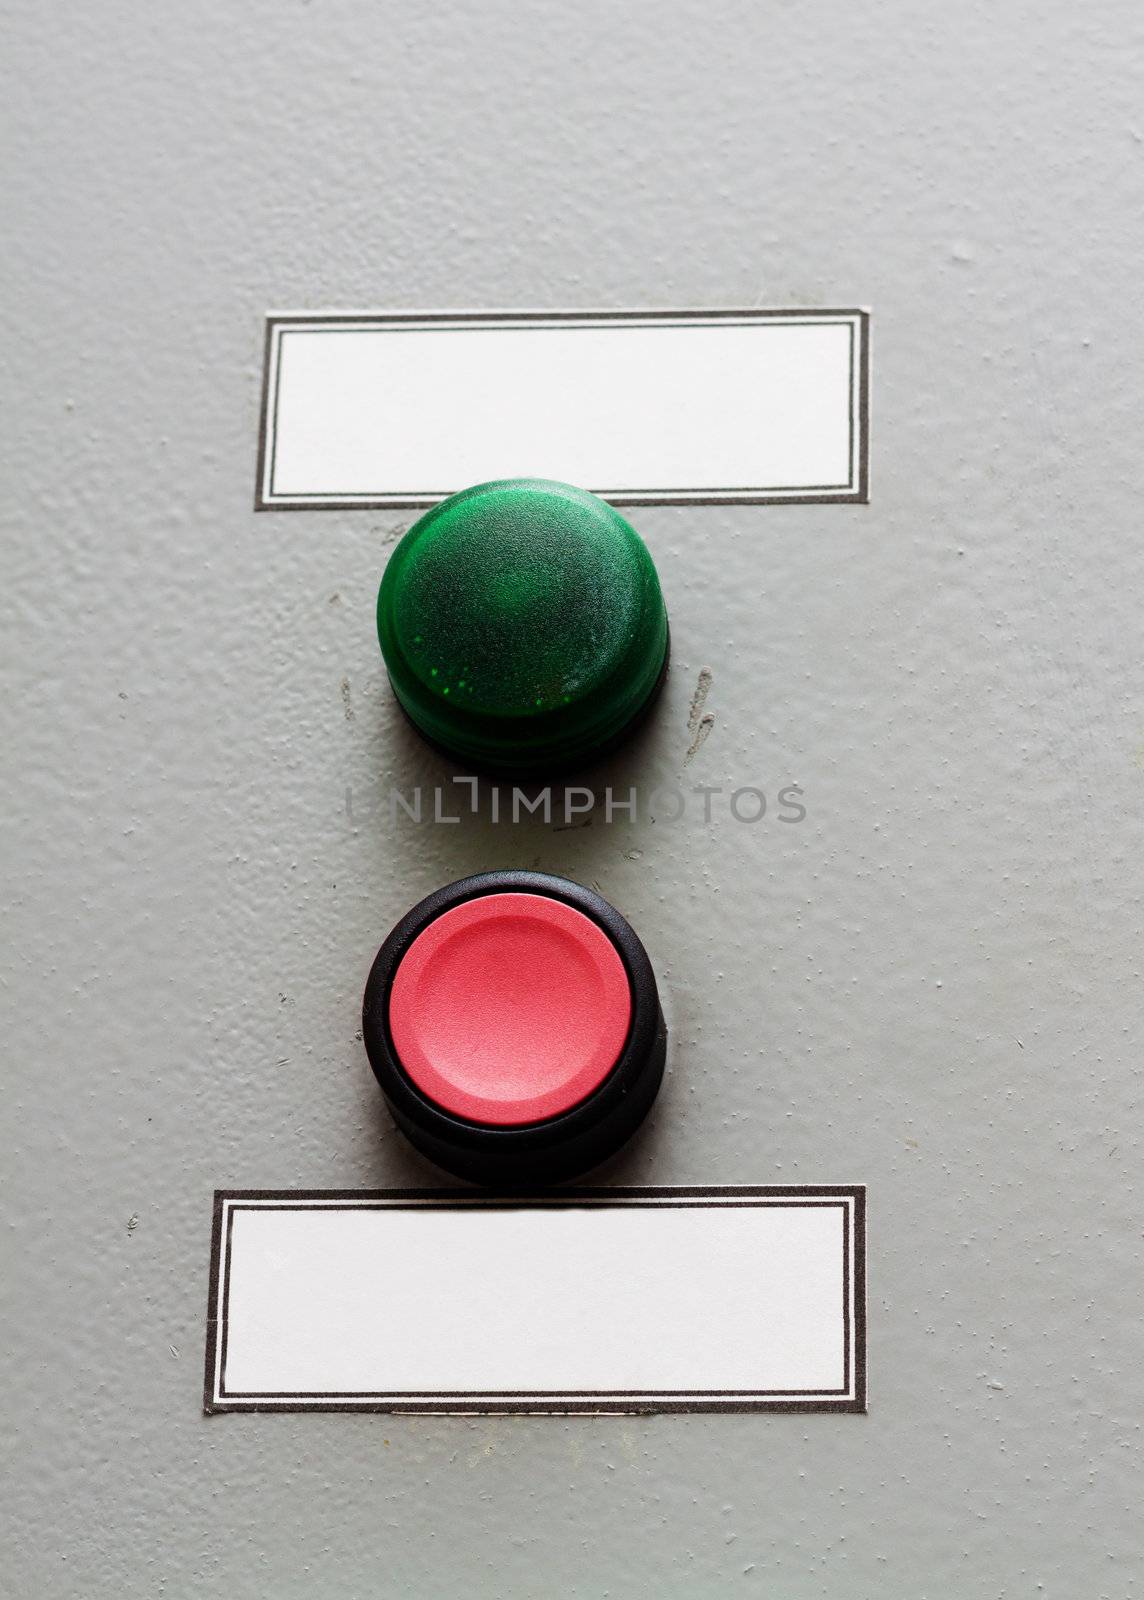 Green start and red stop buttons